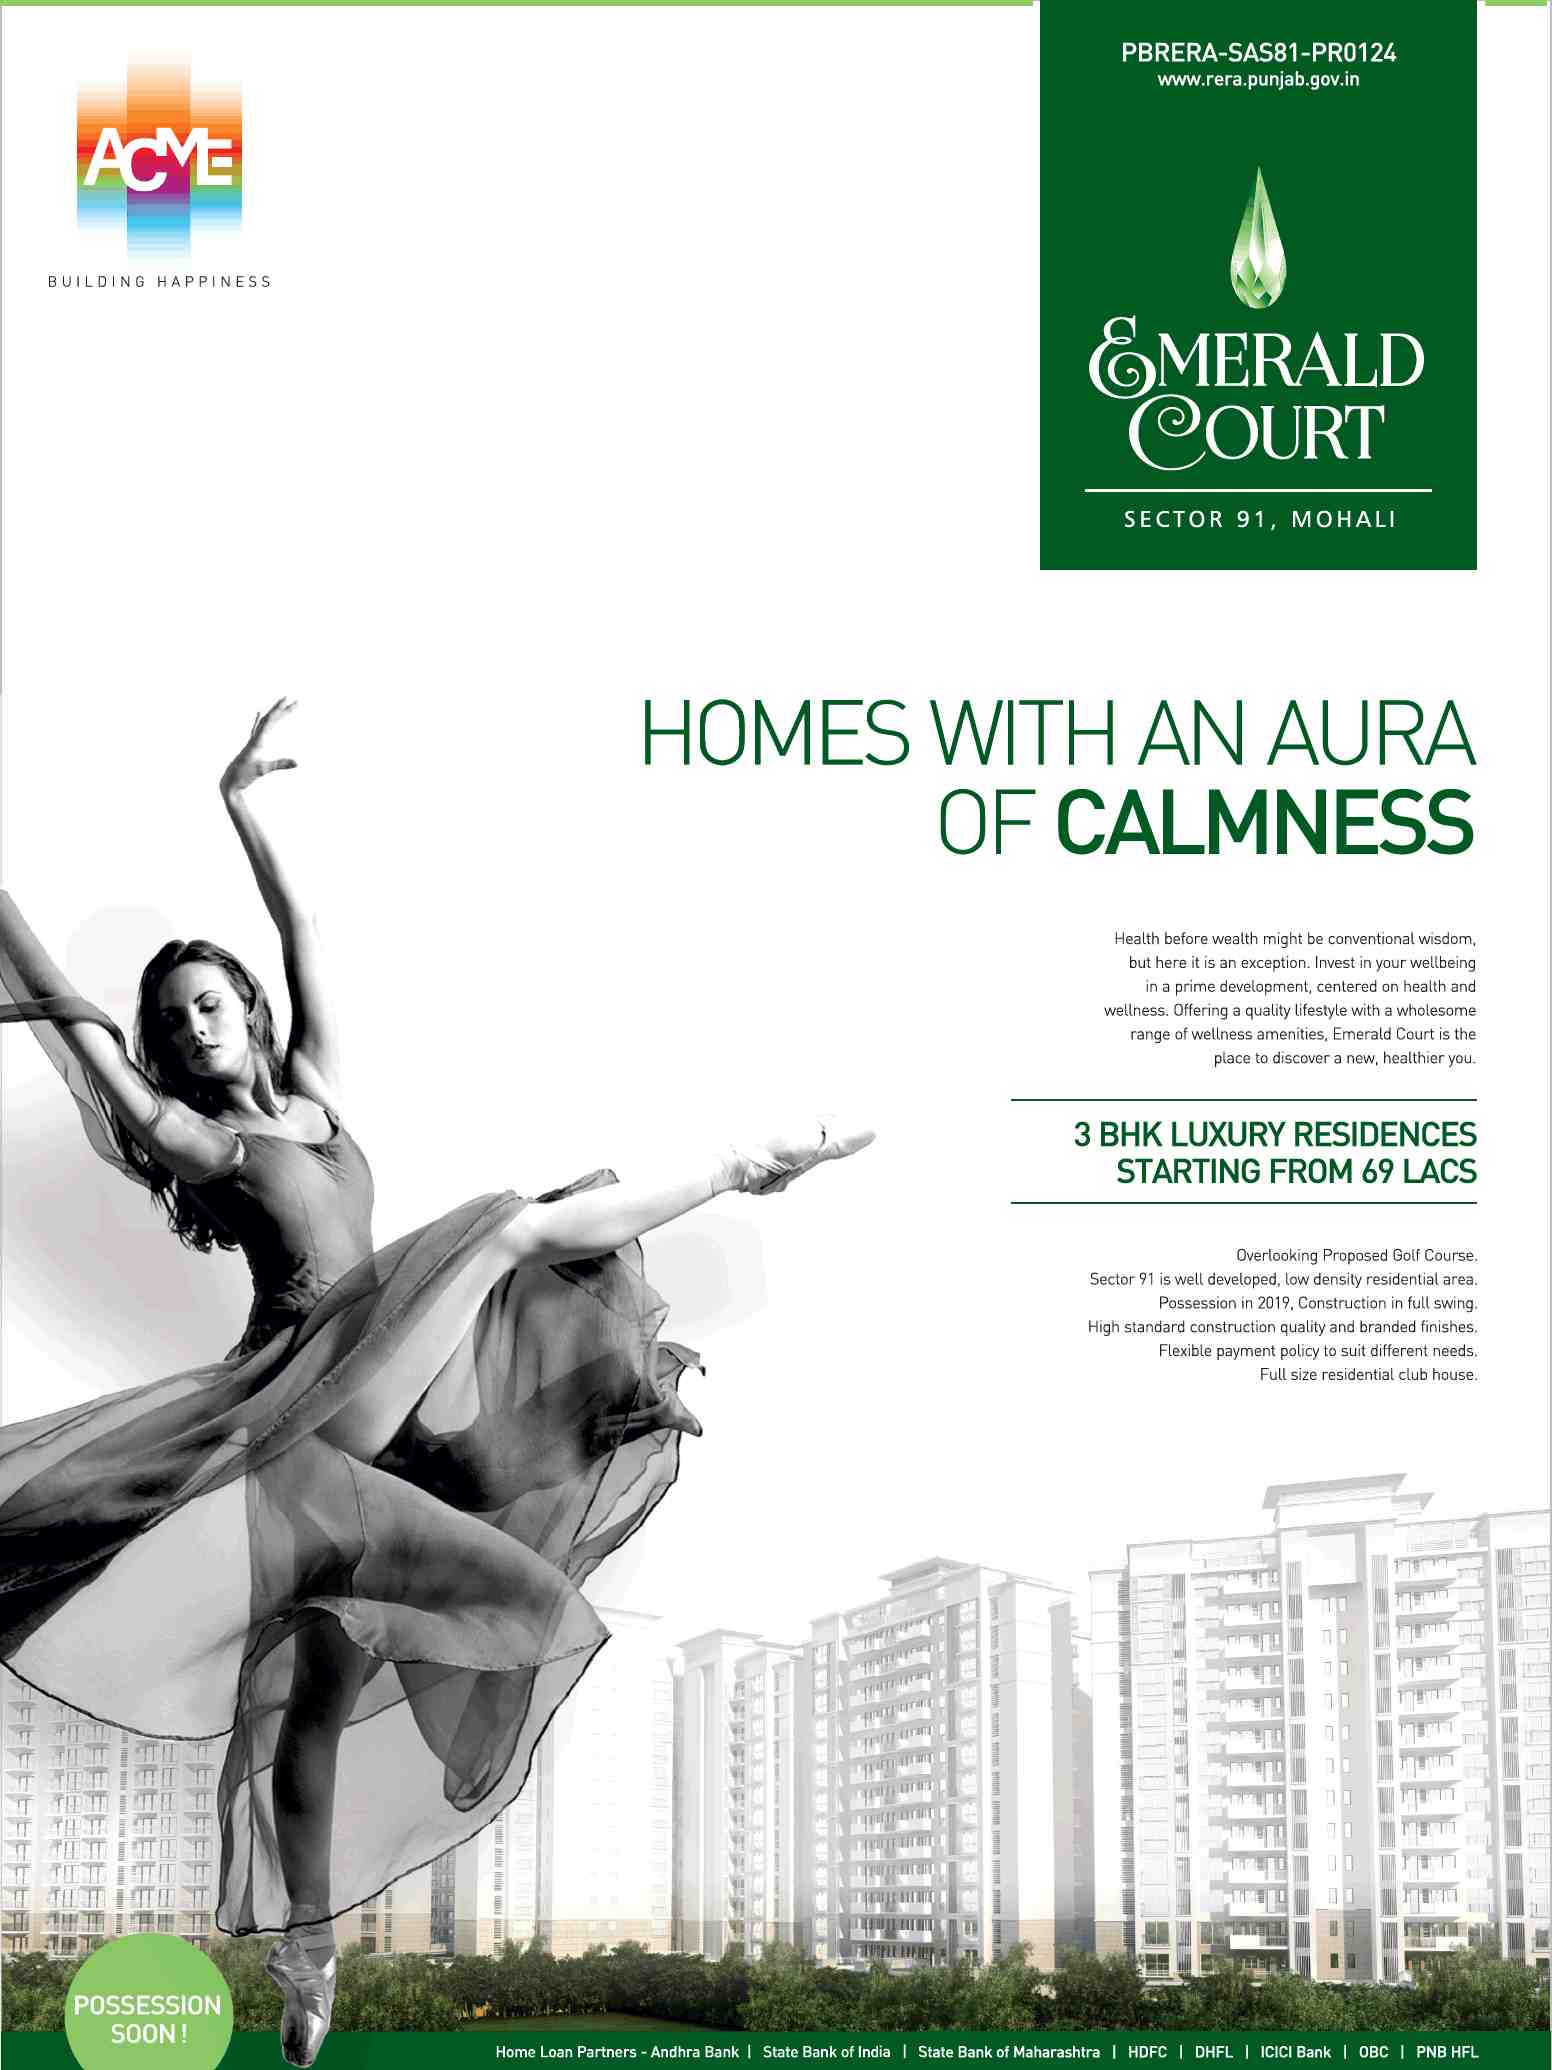 Live in homes with an aura of calmness at Acme Emerald Court in Sector 91, Mohali